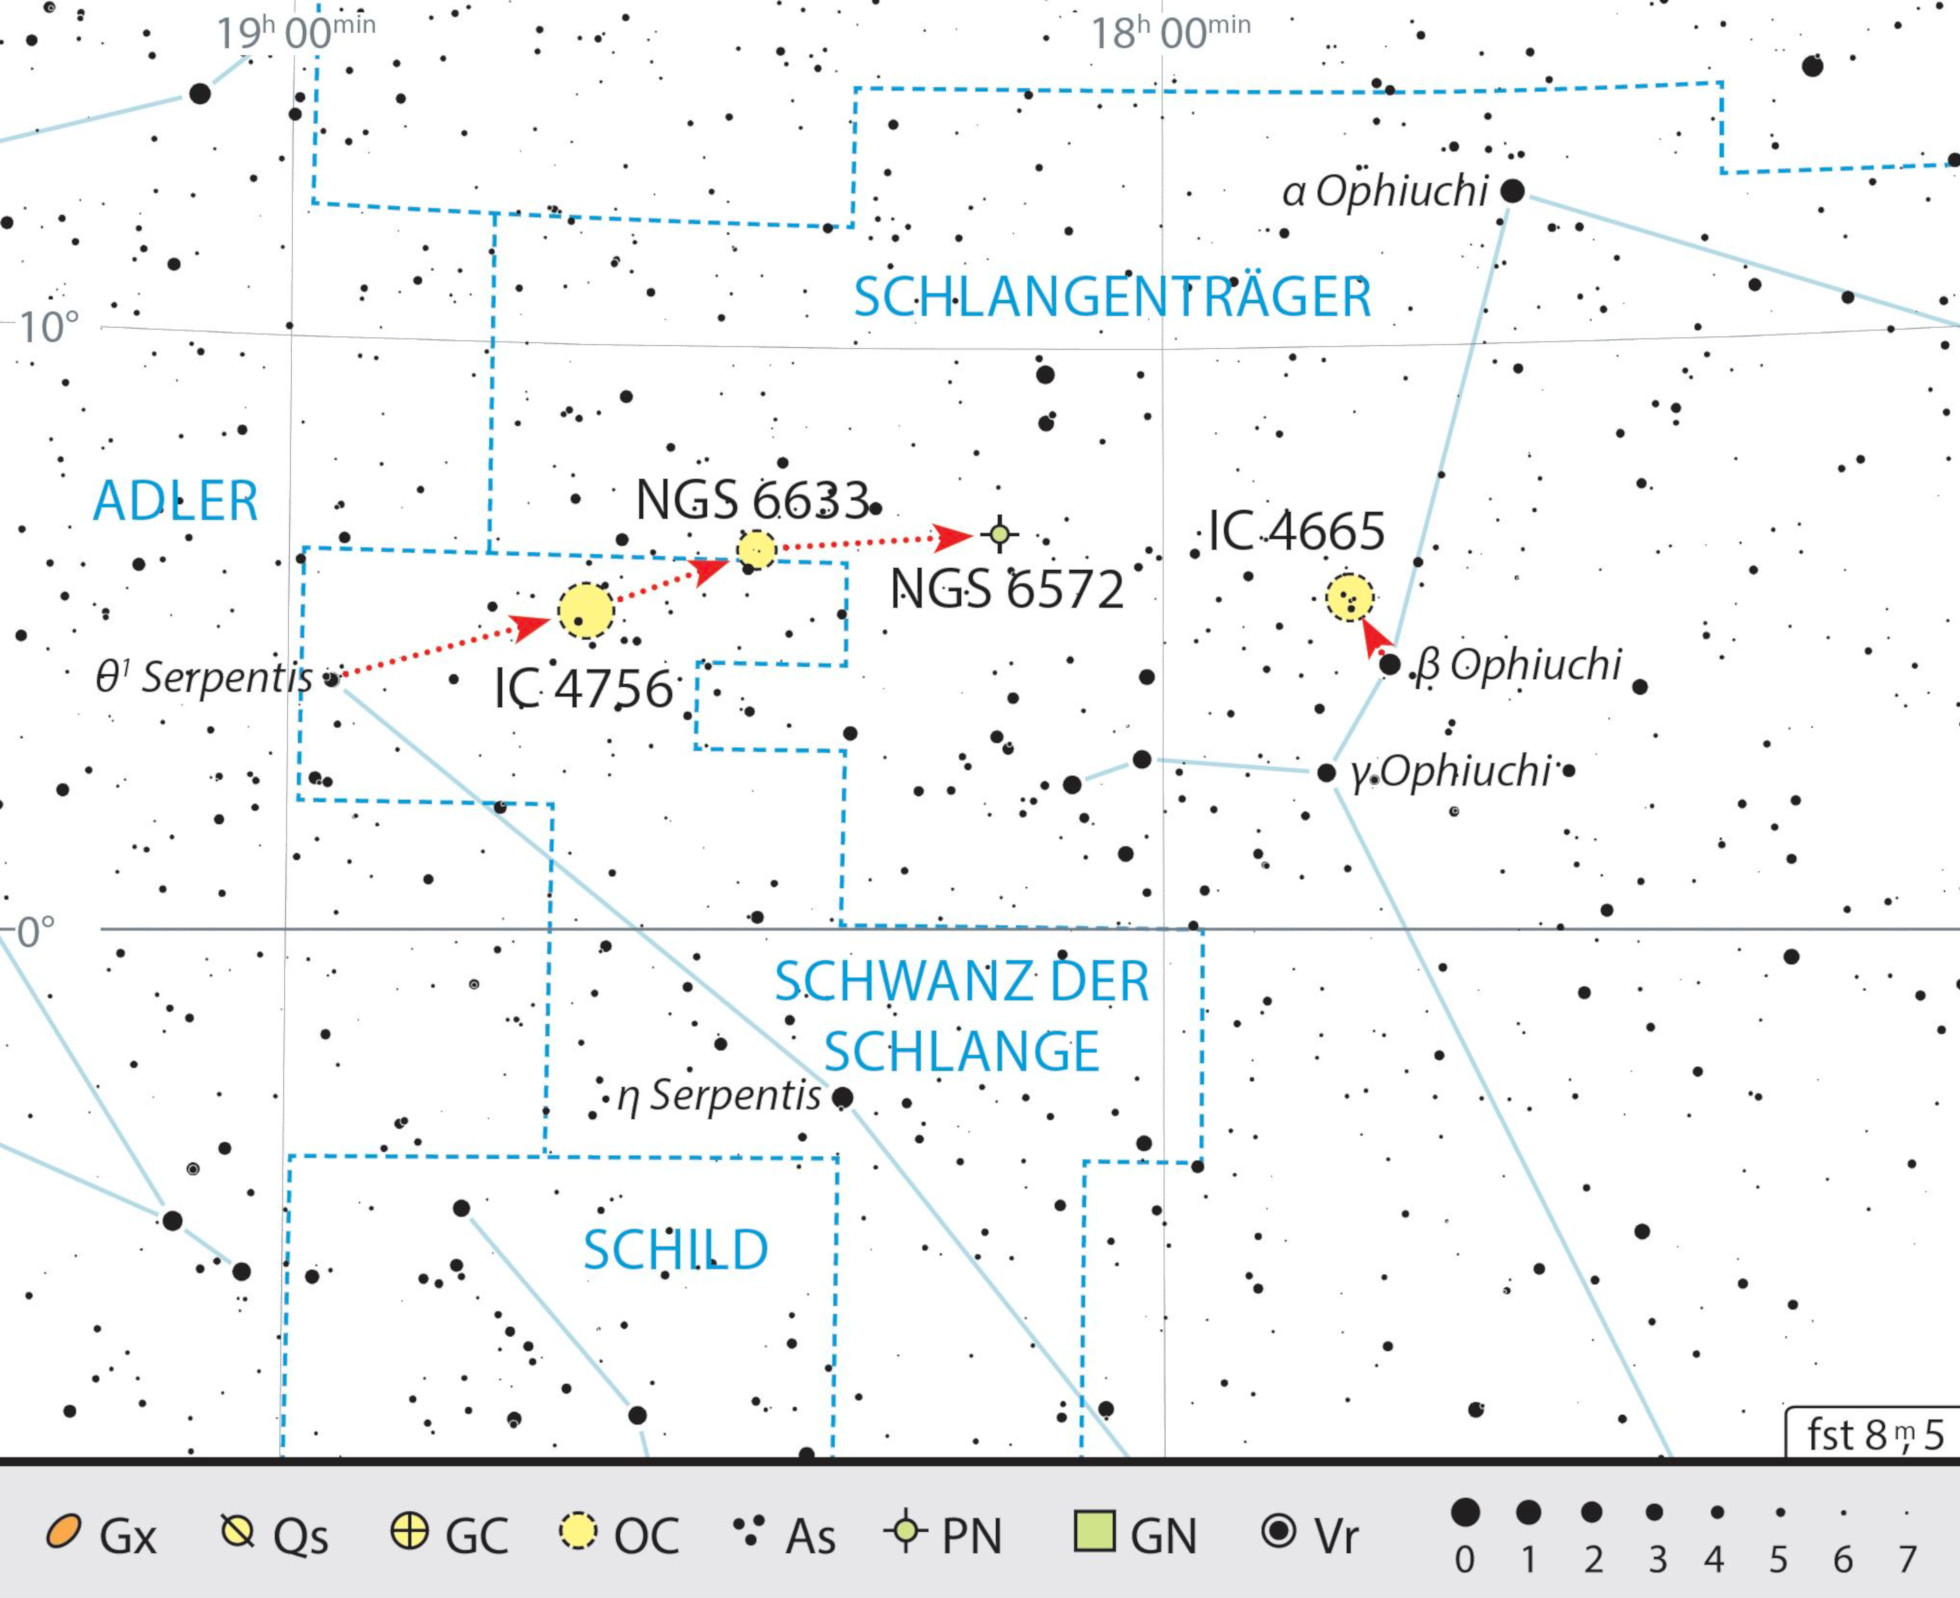 There are many great targets for binoculars in the north-eastern corner of Ophiuchus. J. Scholten